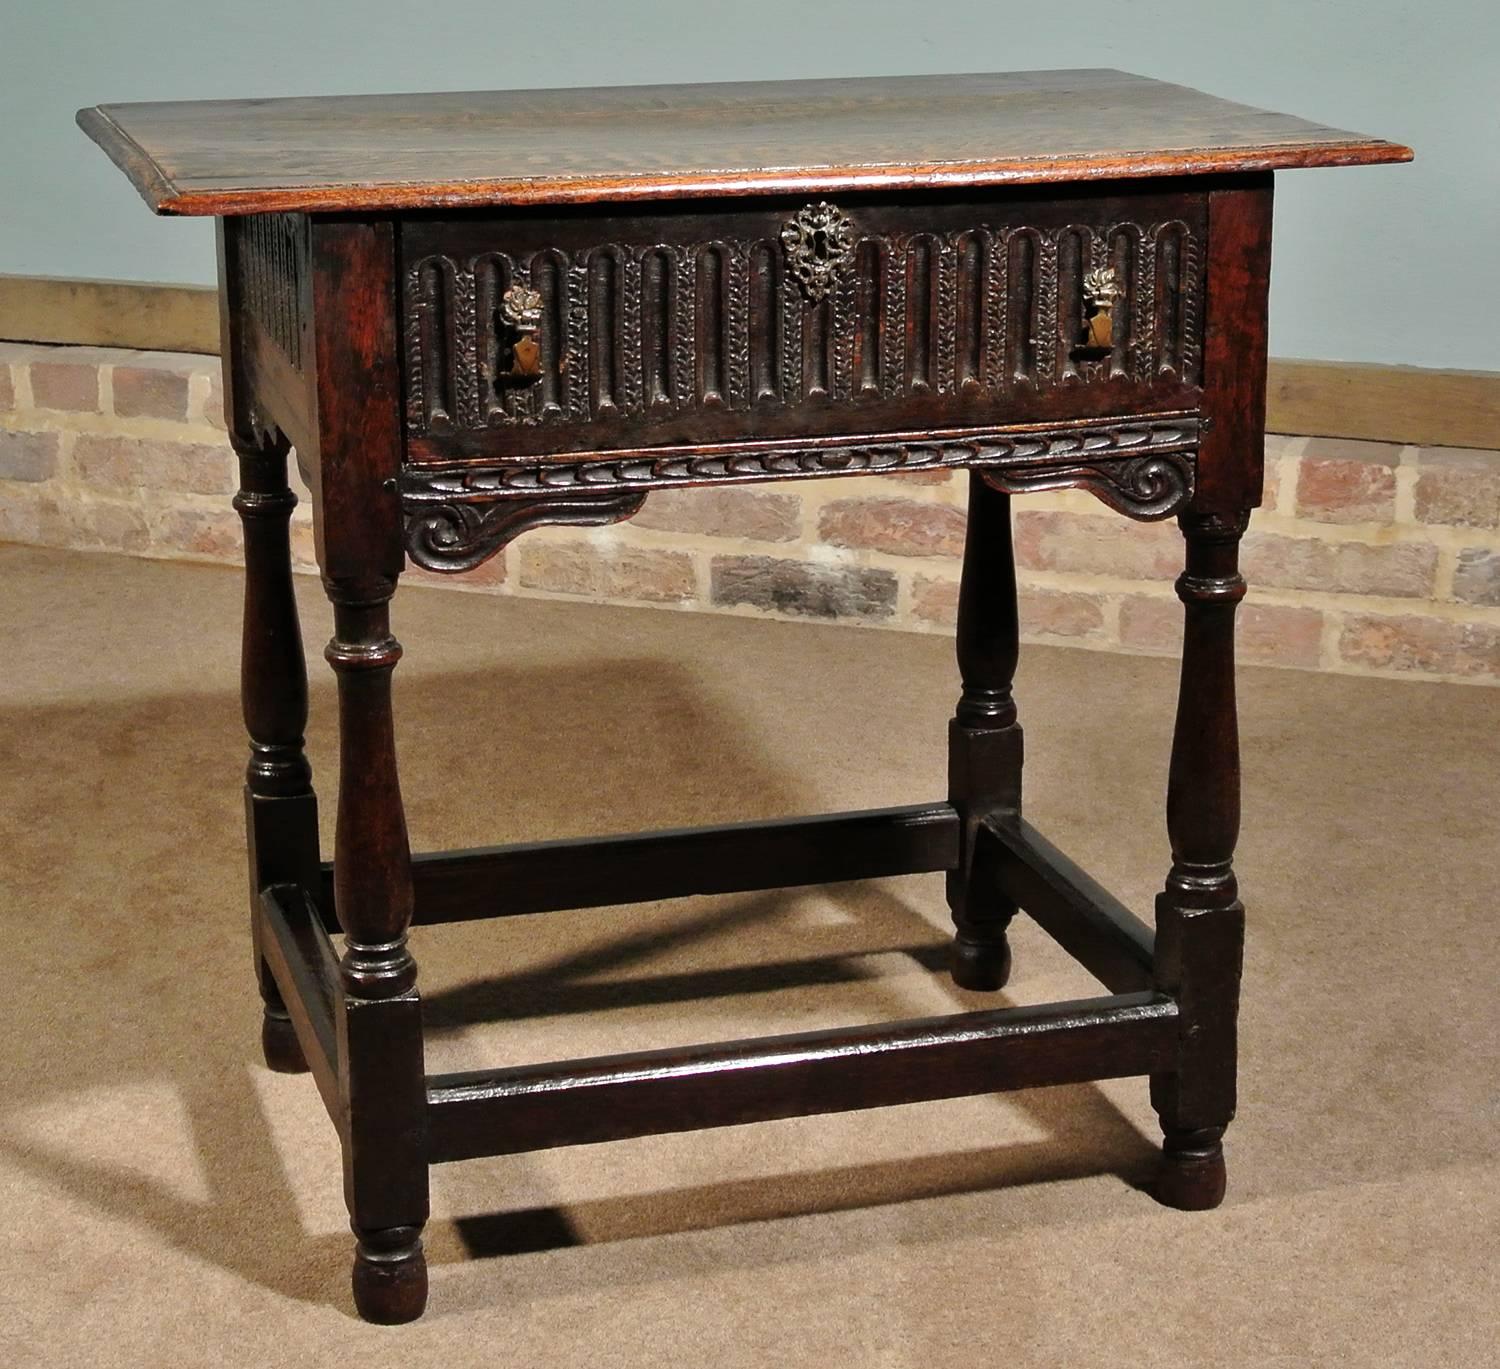 An early and most attractive solid oak lowboy, circa 1630 with a lovely color and retaining its original three plank top with shapely border.

The well turned legs with some old bruises and dings and slight wear to the very tips of the feet